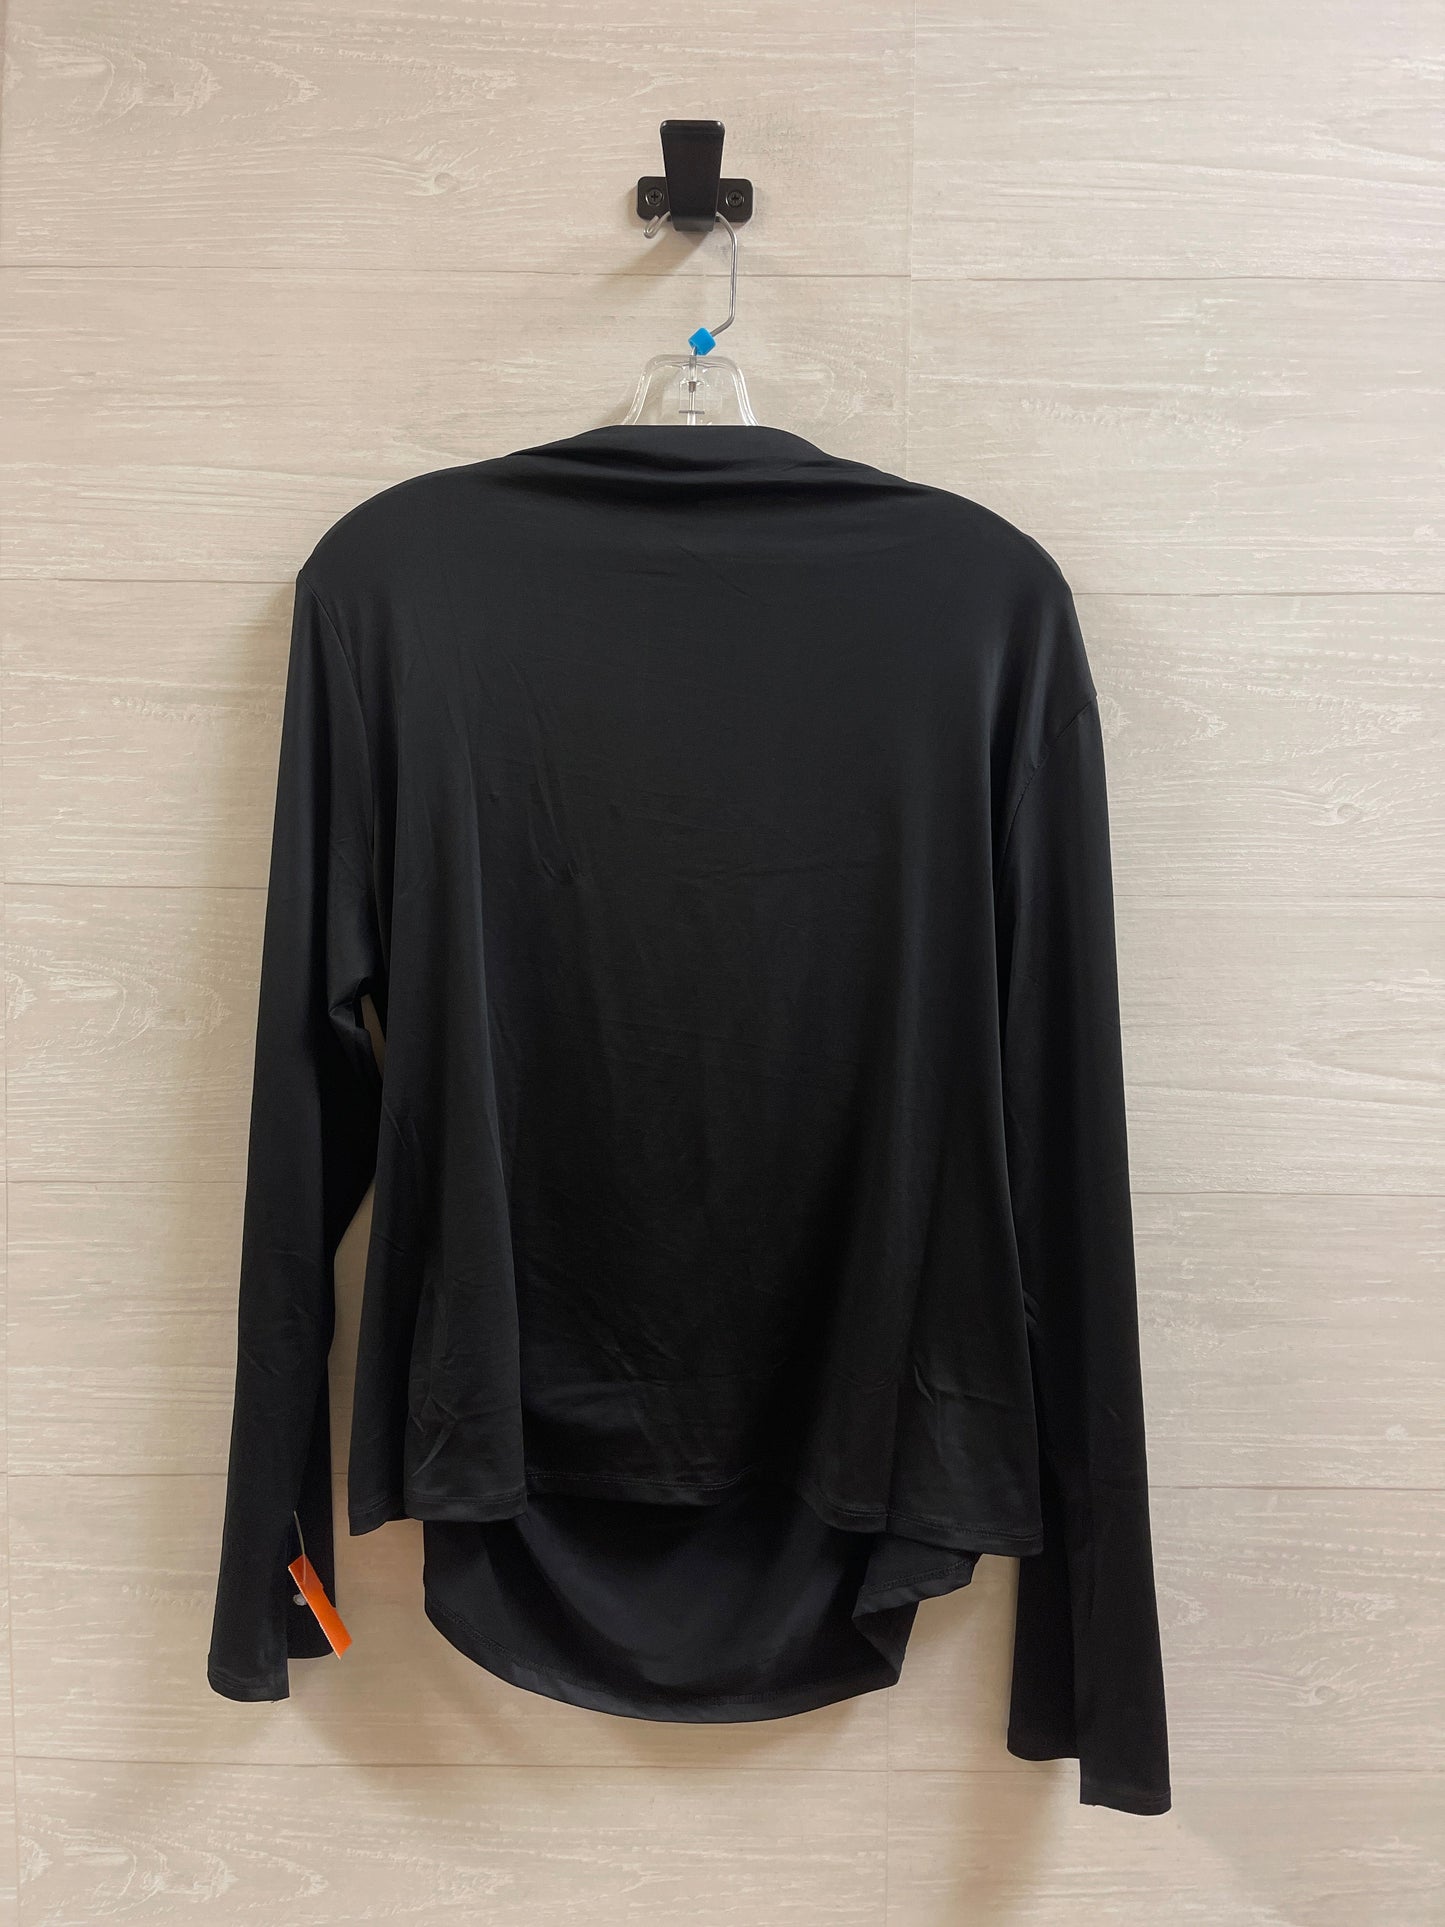 Top Long Sleeve By H&m  Size: 2x